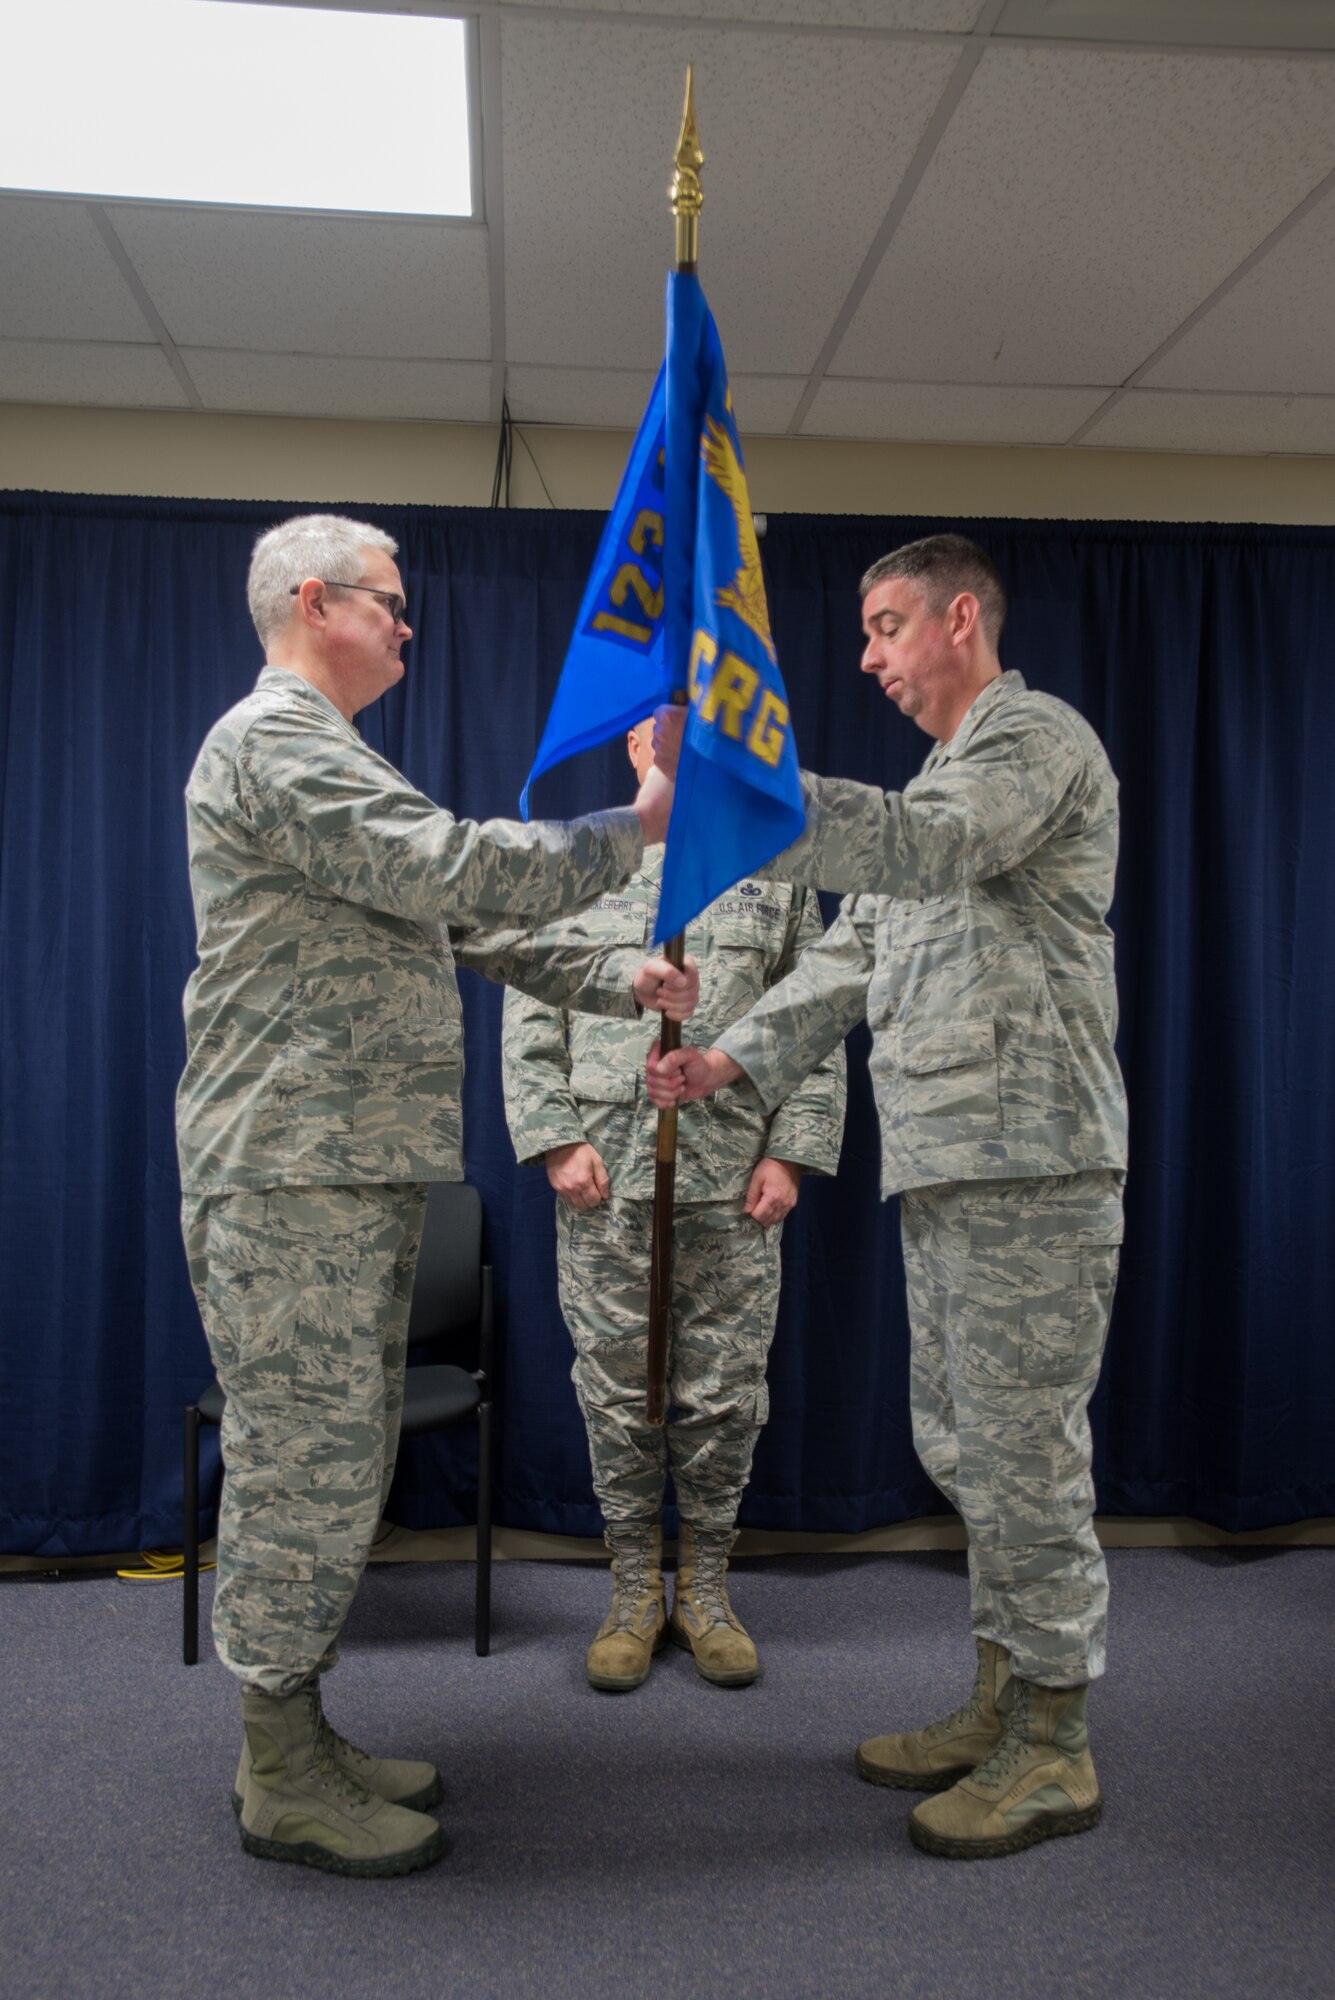 Lt. Col. Bruce Bancroft (right), the new commander of the 123rd Contingency Response Group, accepts the group’s guidon from Col. David Mounkes, wing commander of the 123rd Airlift Wing, during a ceremony at the Kentucky Air National Guard base in Louisville, Ky., on Nov. 5, 2016. (U.S. Air National Guard photo by Tech. Sgt. Vicky Spesard)